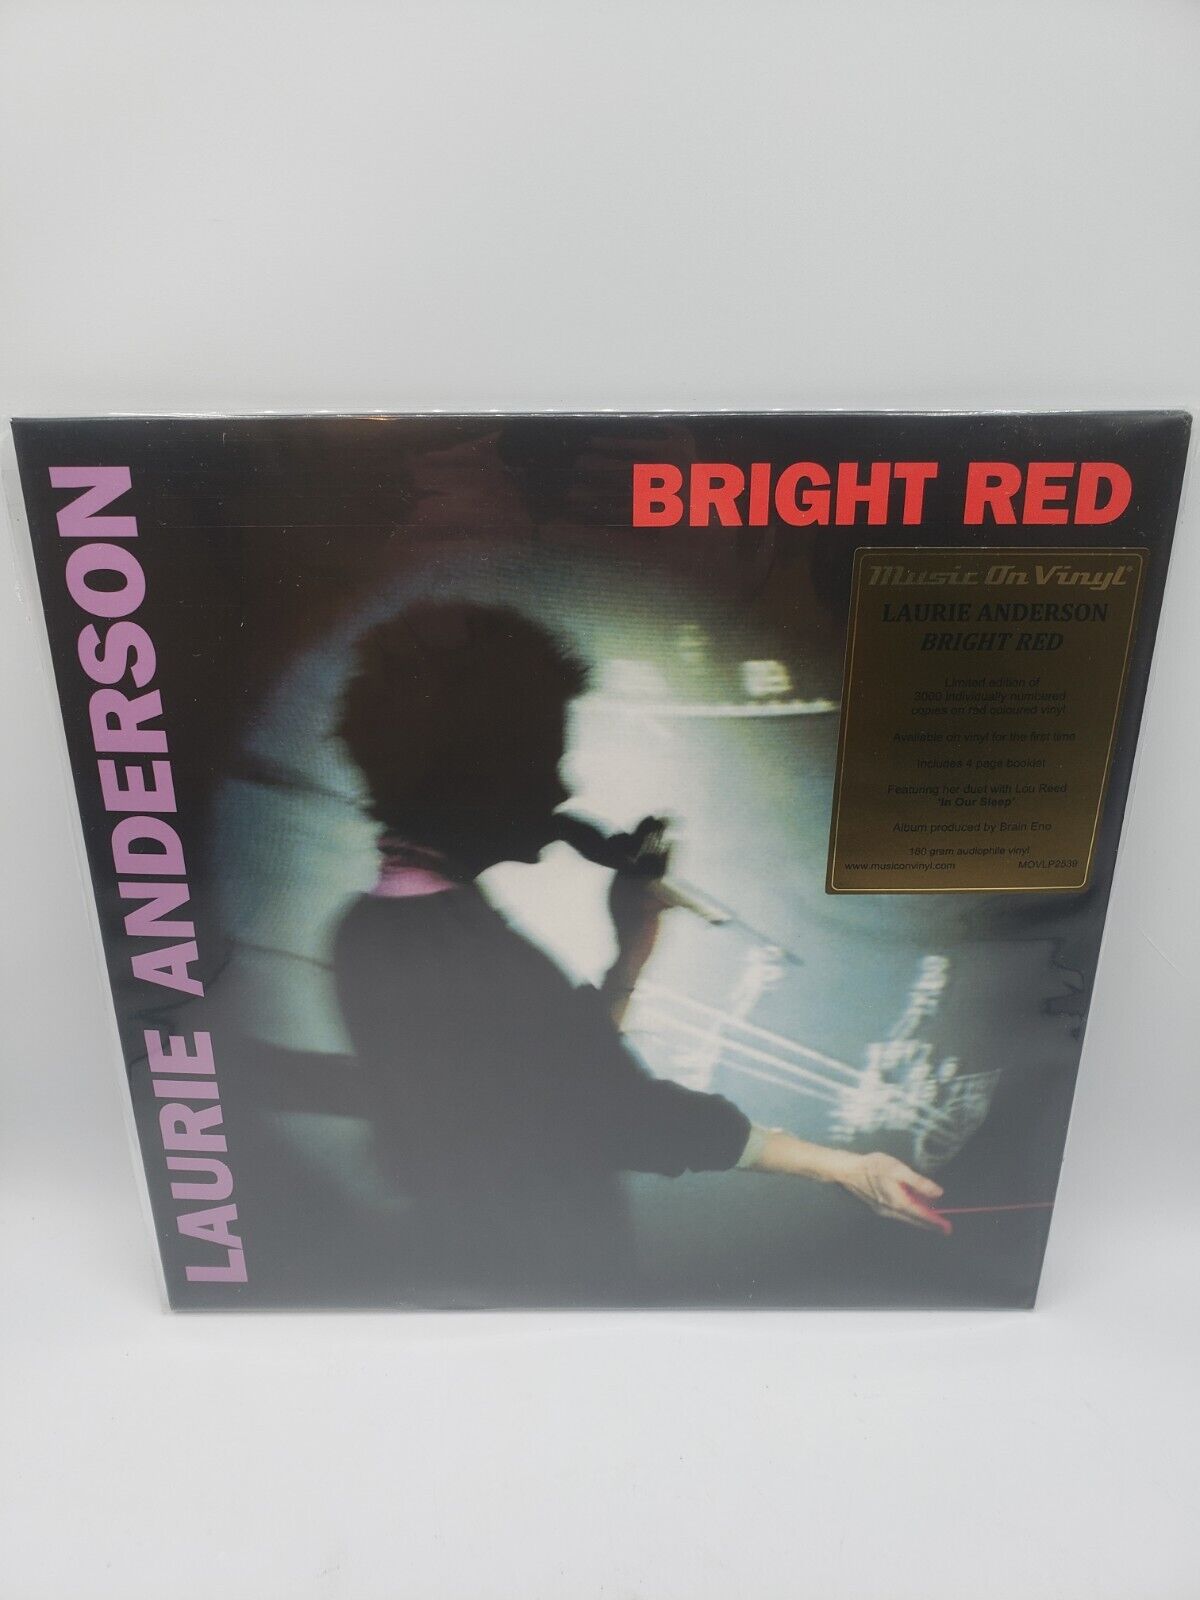 Laurie Anderson - Bright Red - Limited 180-Gram Red Colored Vinyl [New Vinyl LP]